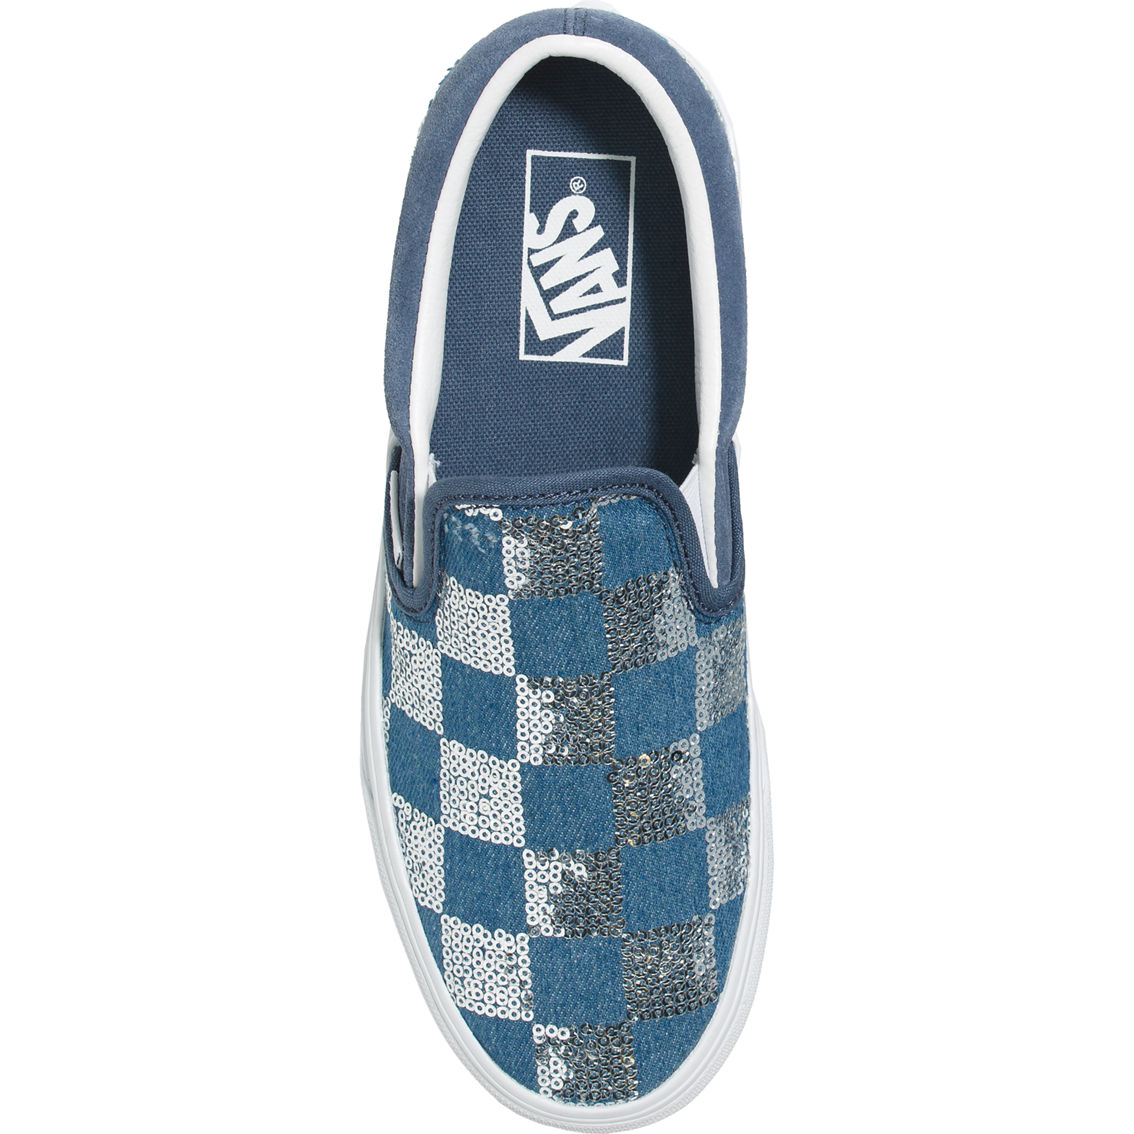 Vans Classic Slip On Stackform Glimmer Check Shoes - Image 3 of 4